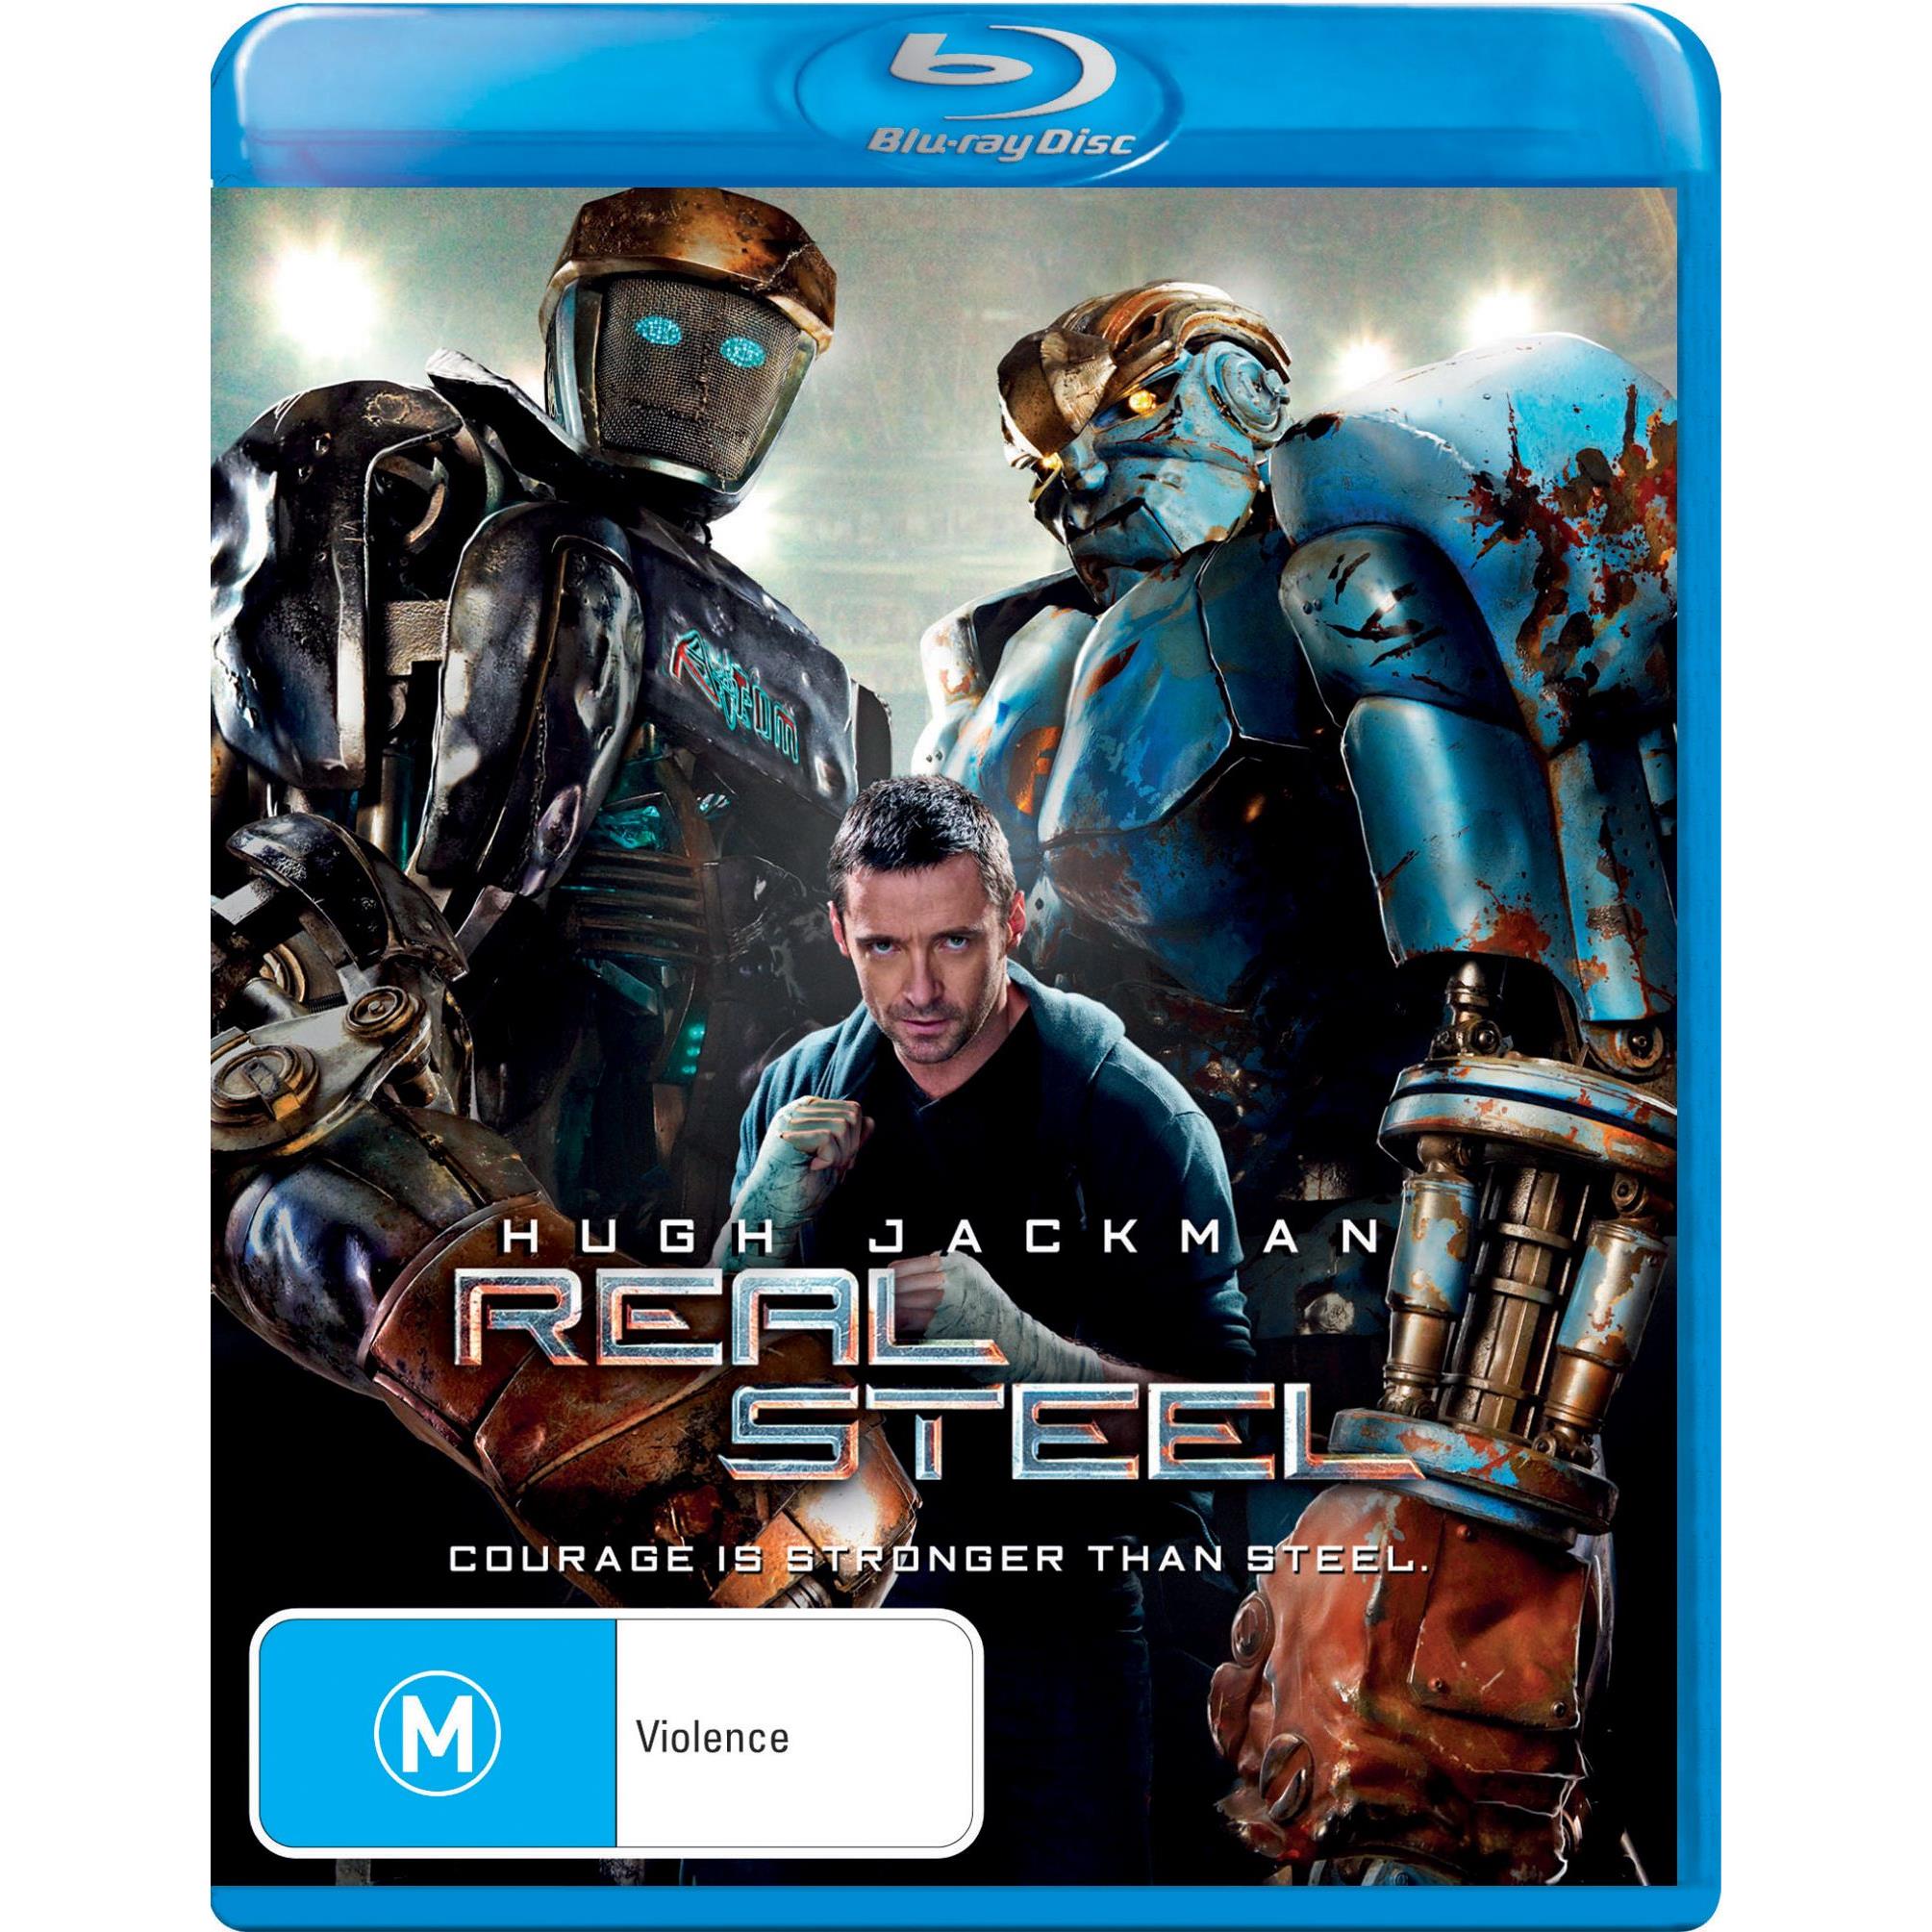 Atom - Real Steel - 2013 | Real steel, Robots drawing, Boxing images